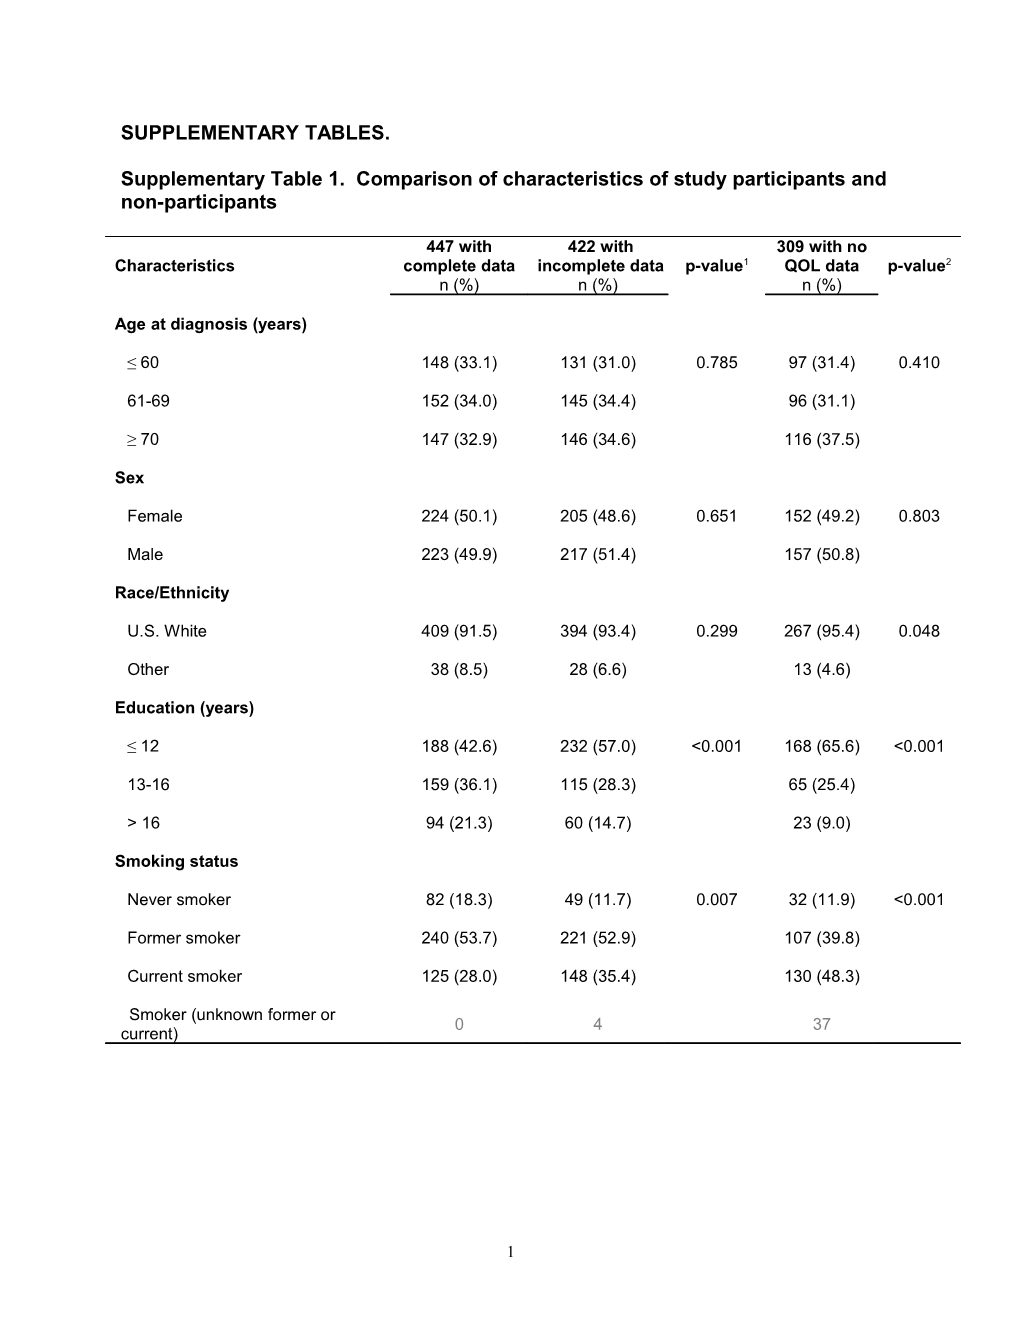 Supplementary Table 1. Comparison of Characteristics of Study Participants and Non-Participants